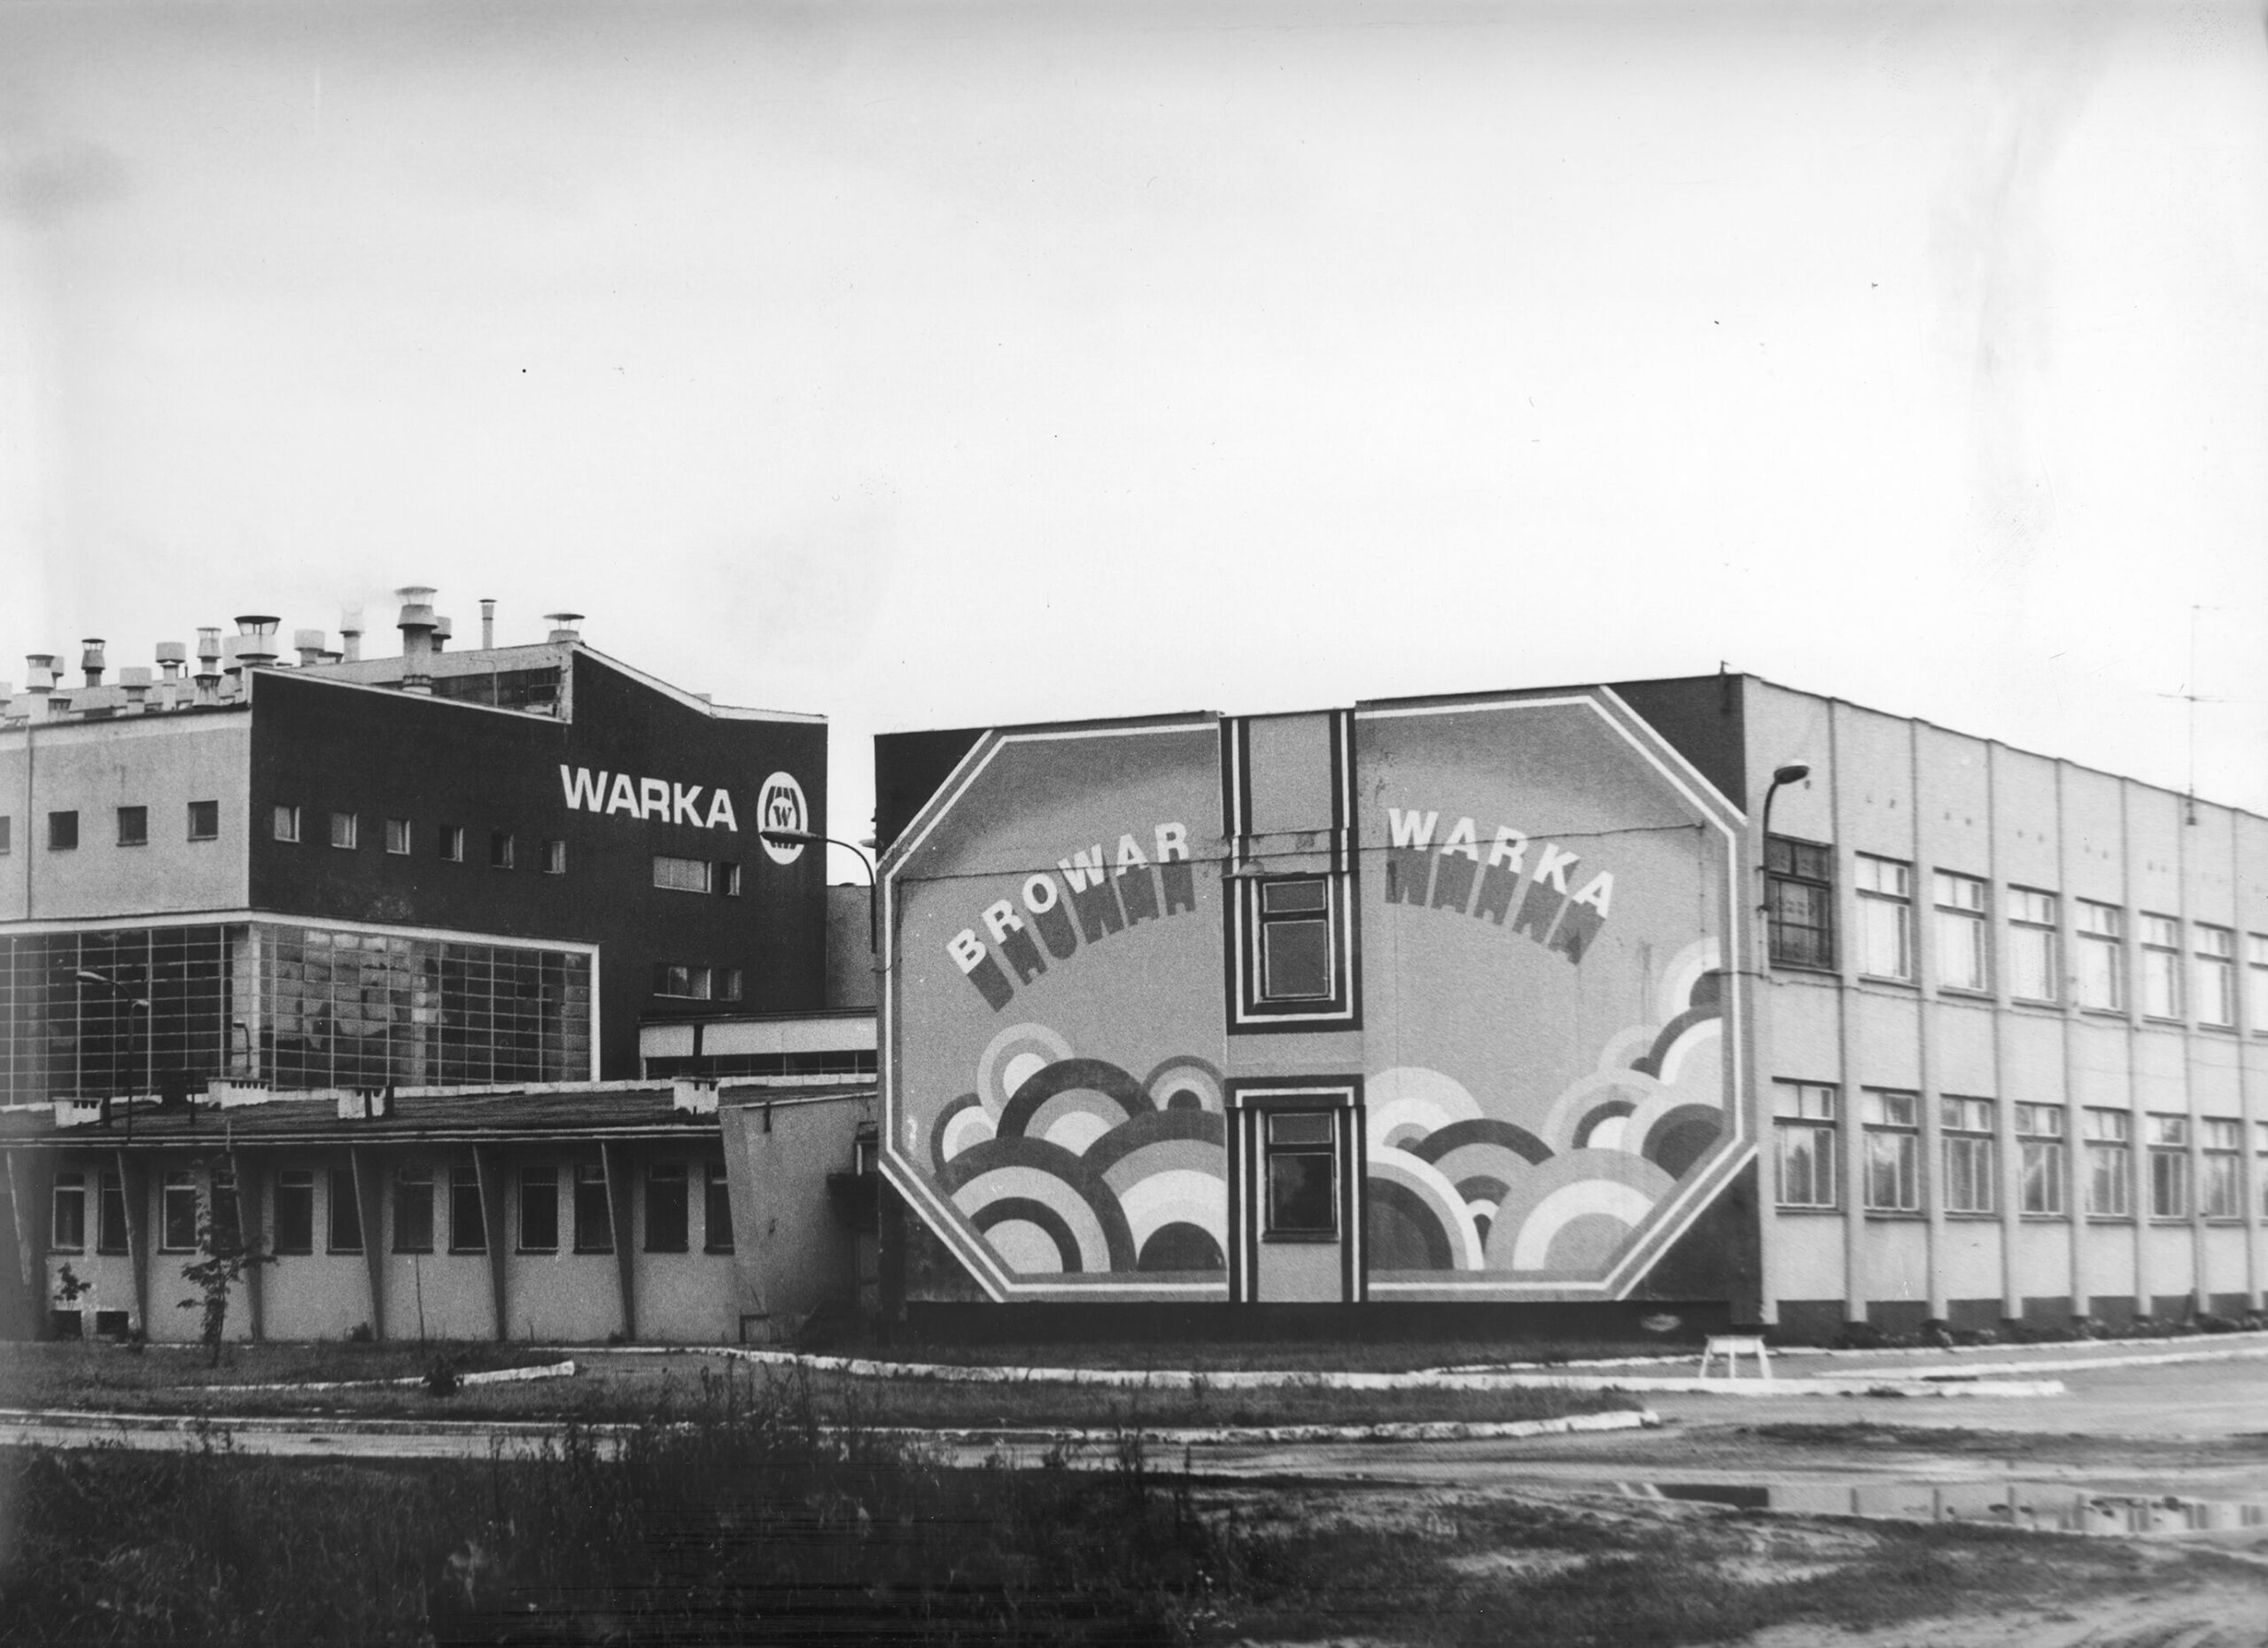 Brewery in Warka, 1970s